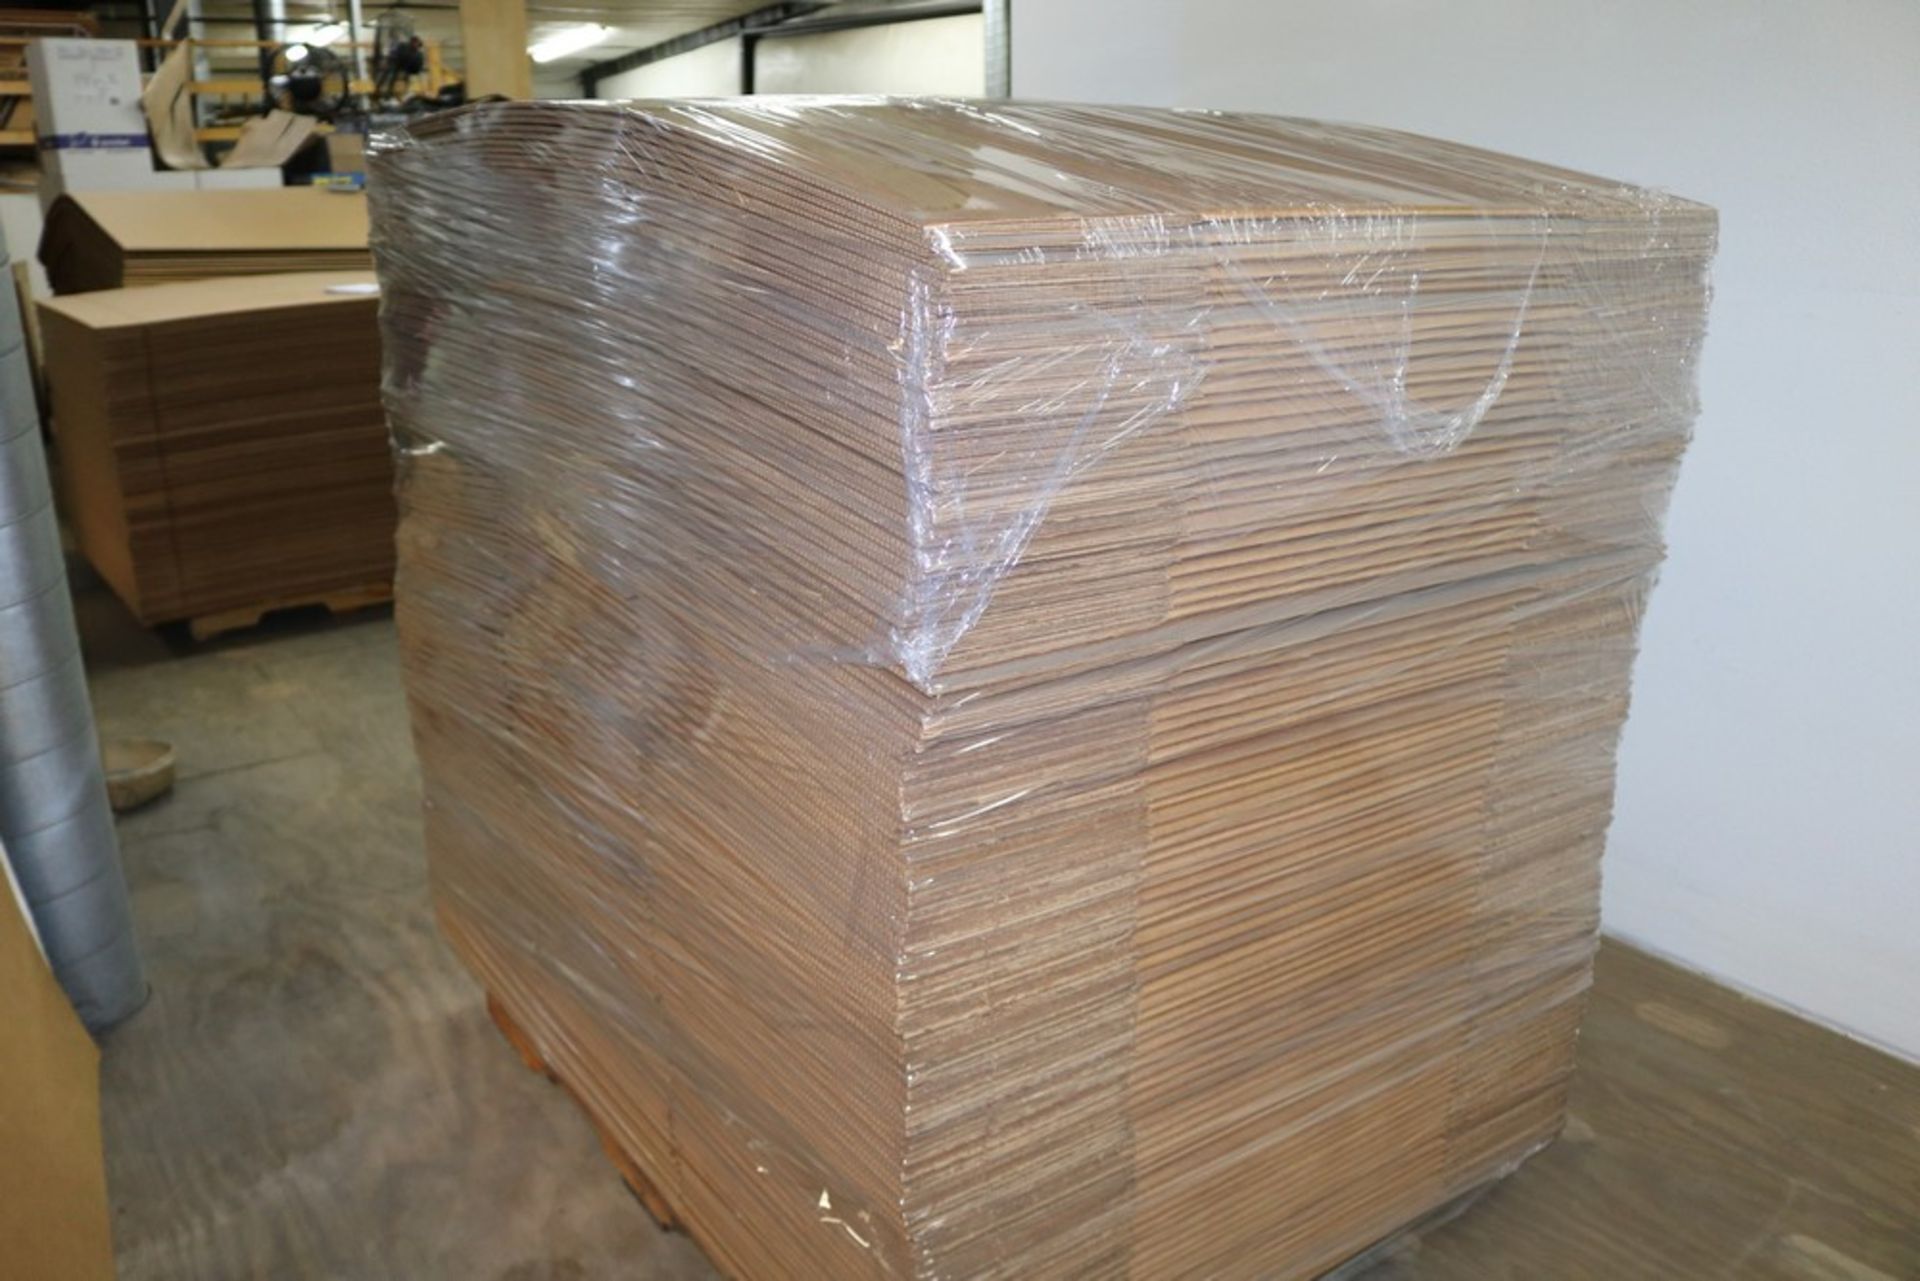 Pallet of Cardboard Boxes NEW 38" x 21" x 20" - Image 2 of 2